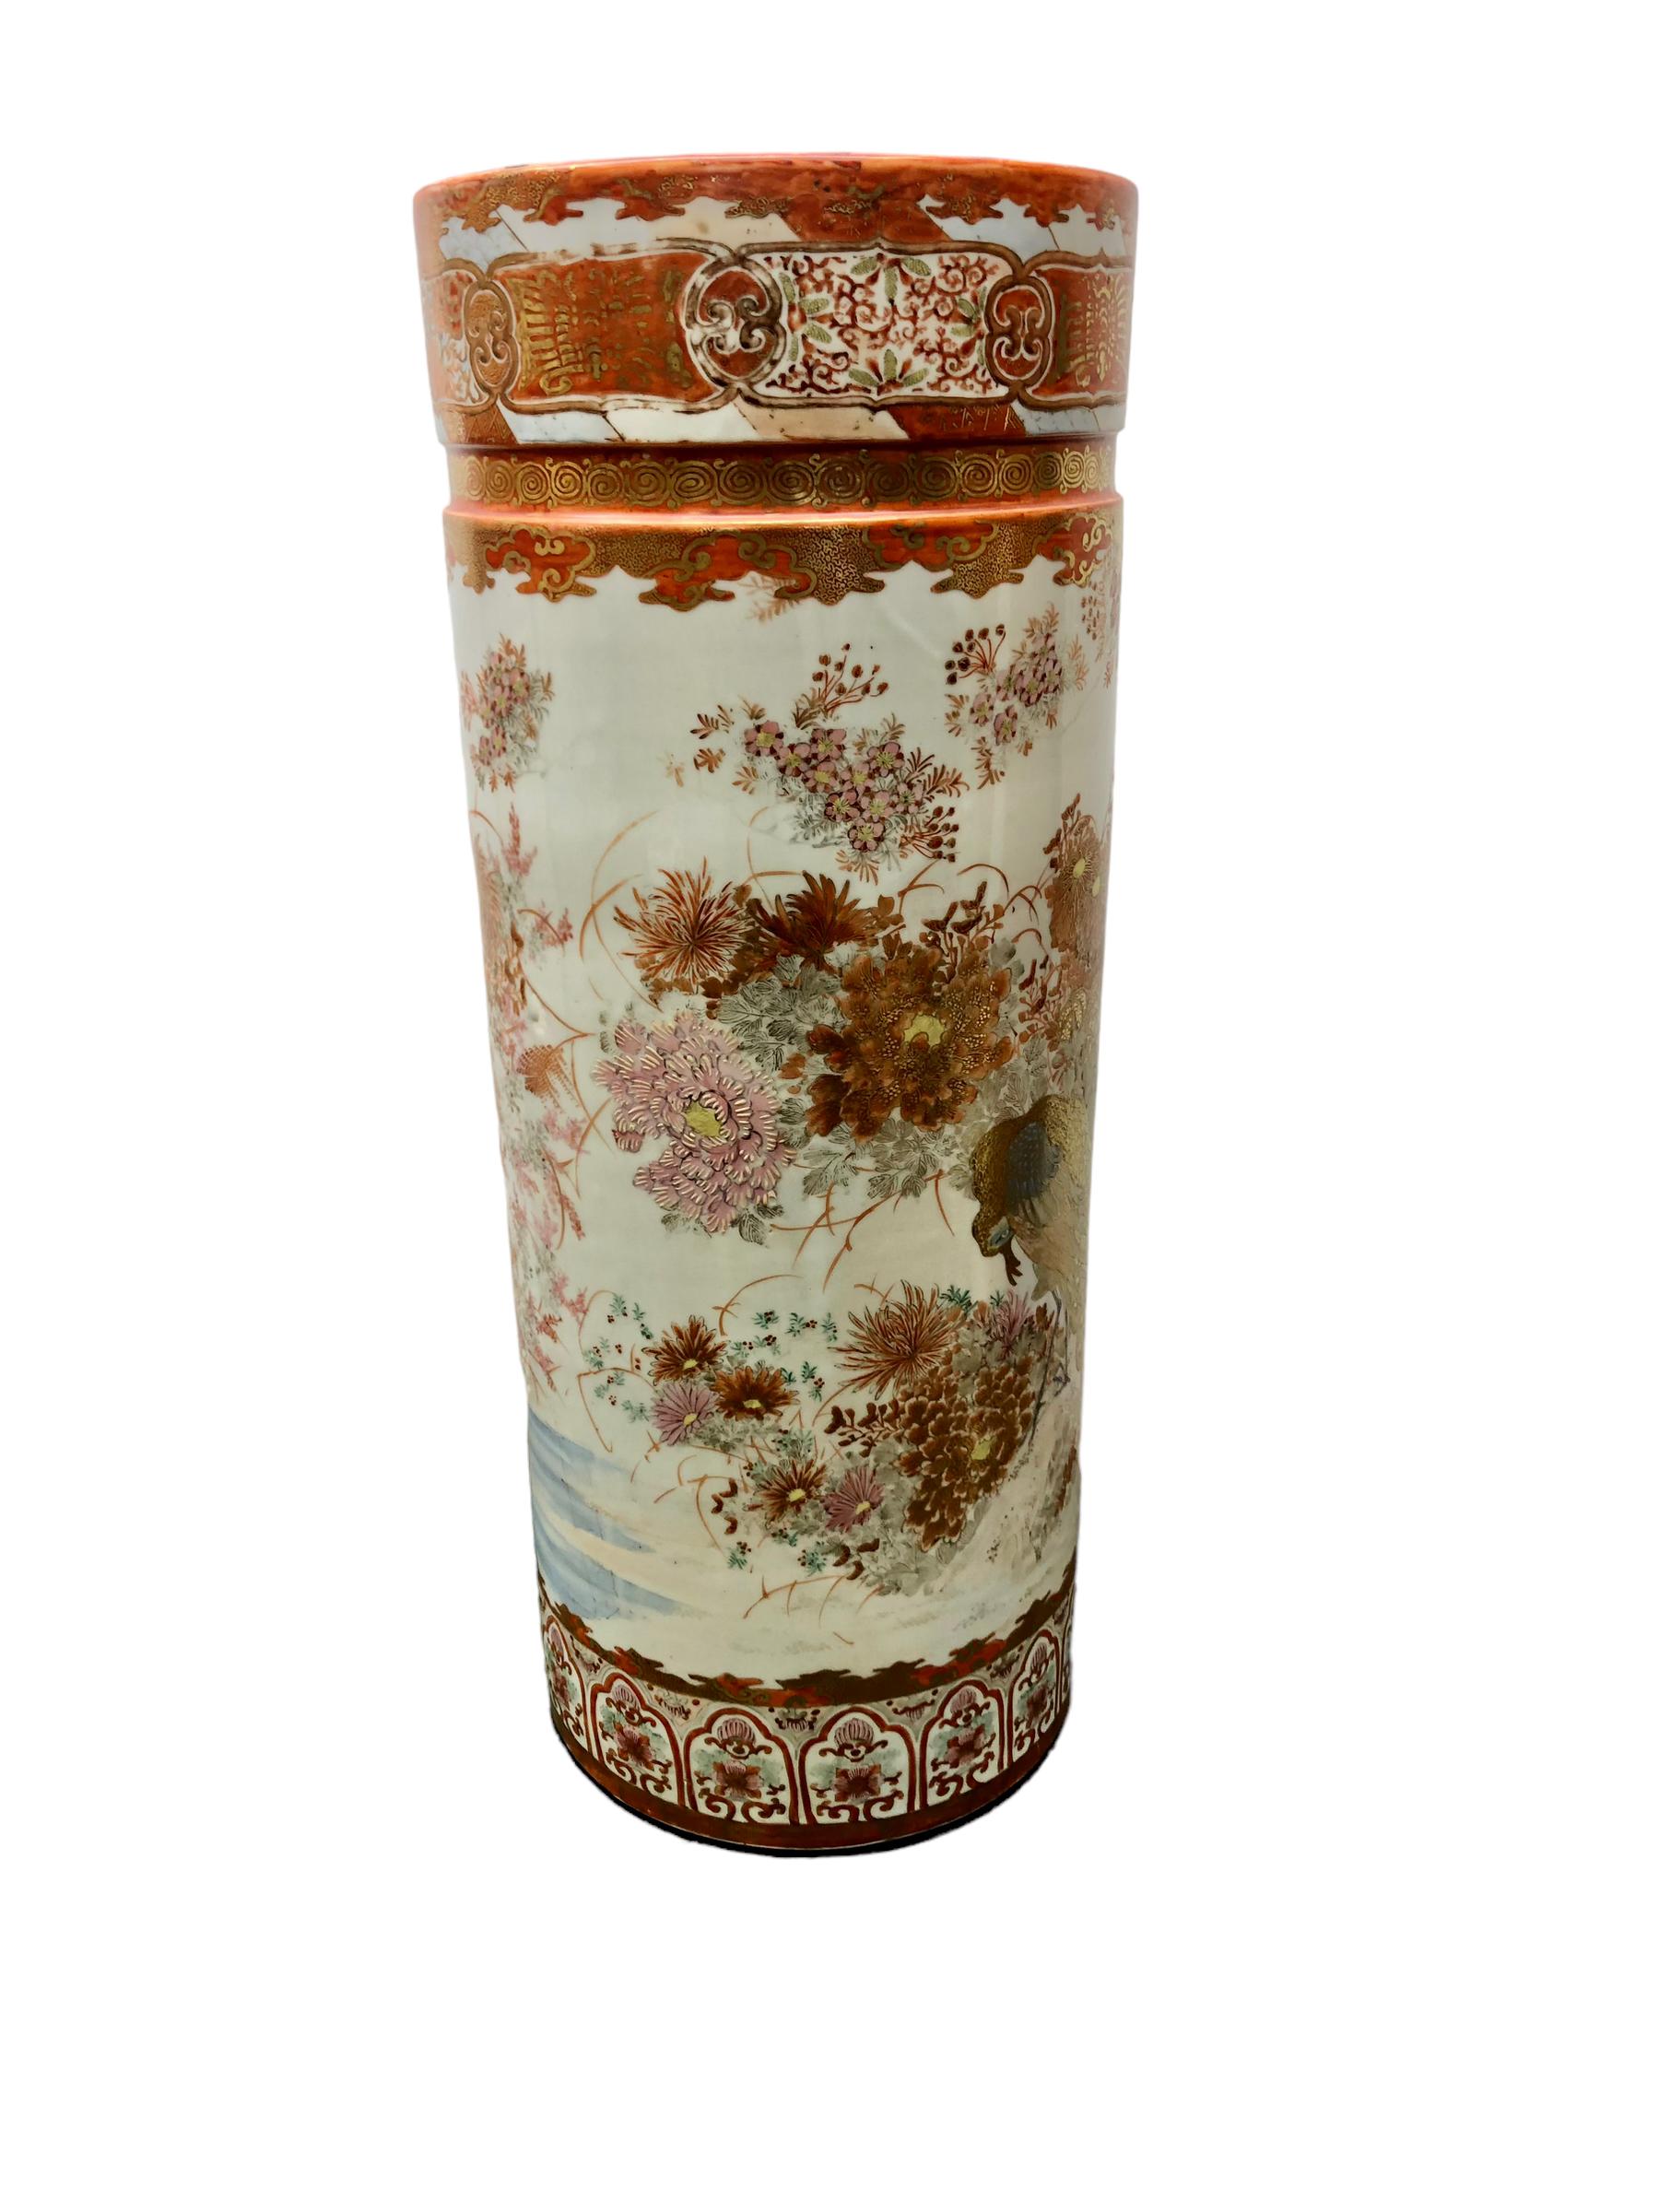 Antique Japanese Kutani Umbrella Stand  In Good Condition For Sale In Chapel Hill, NC